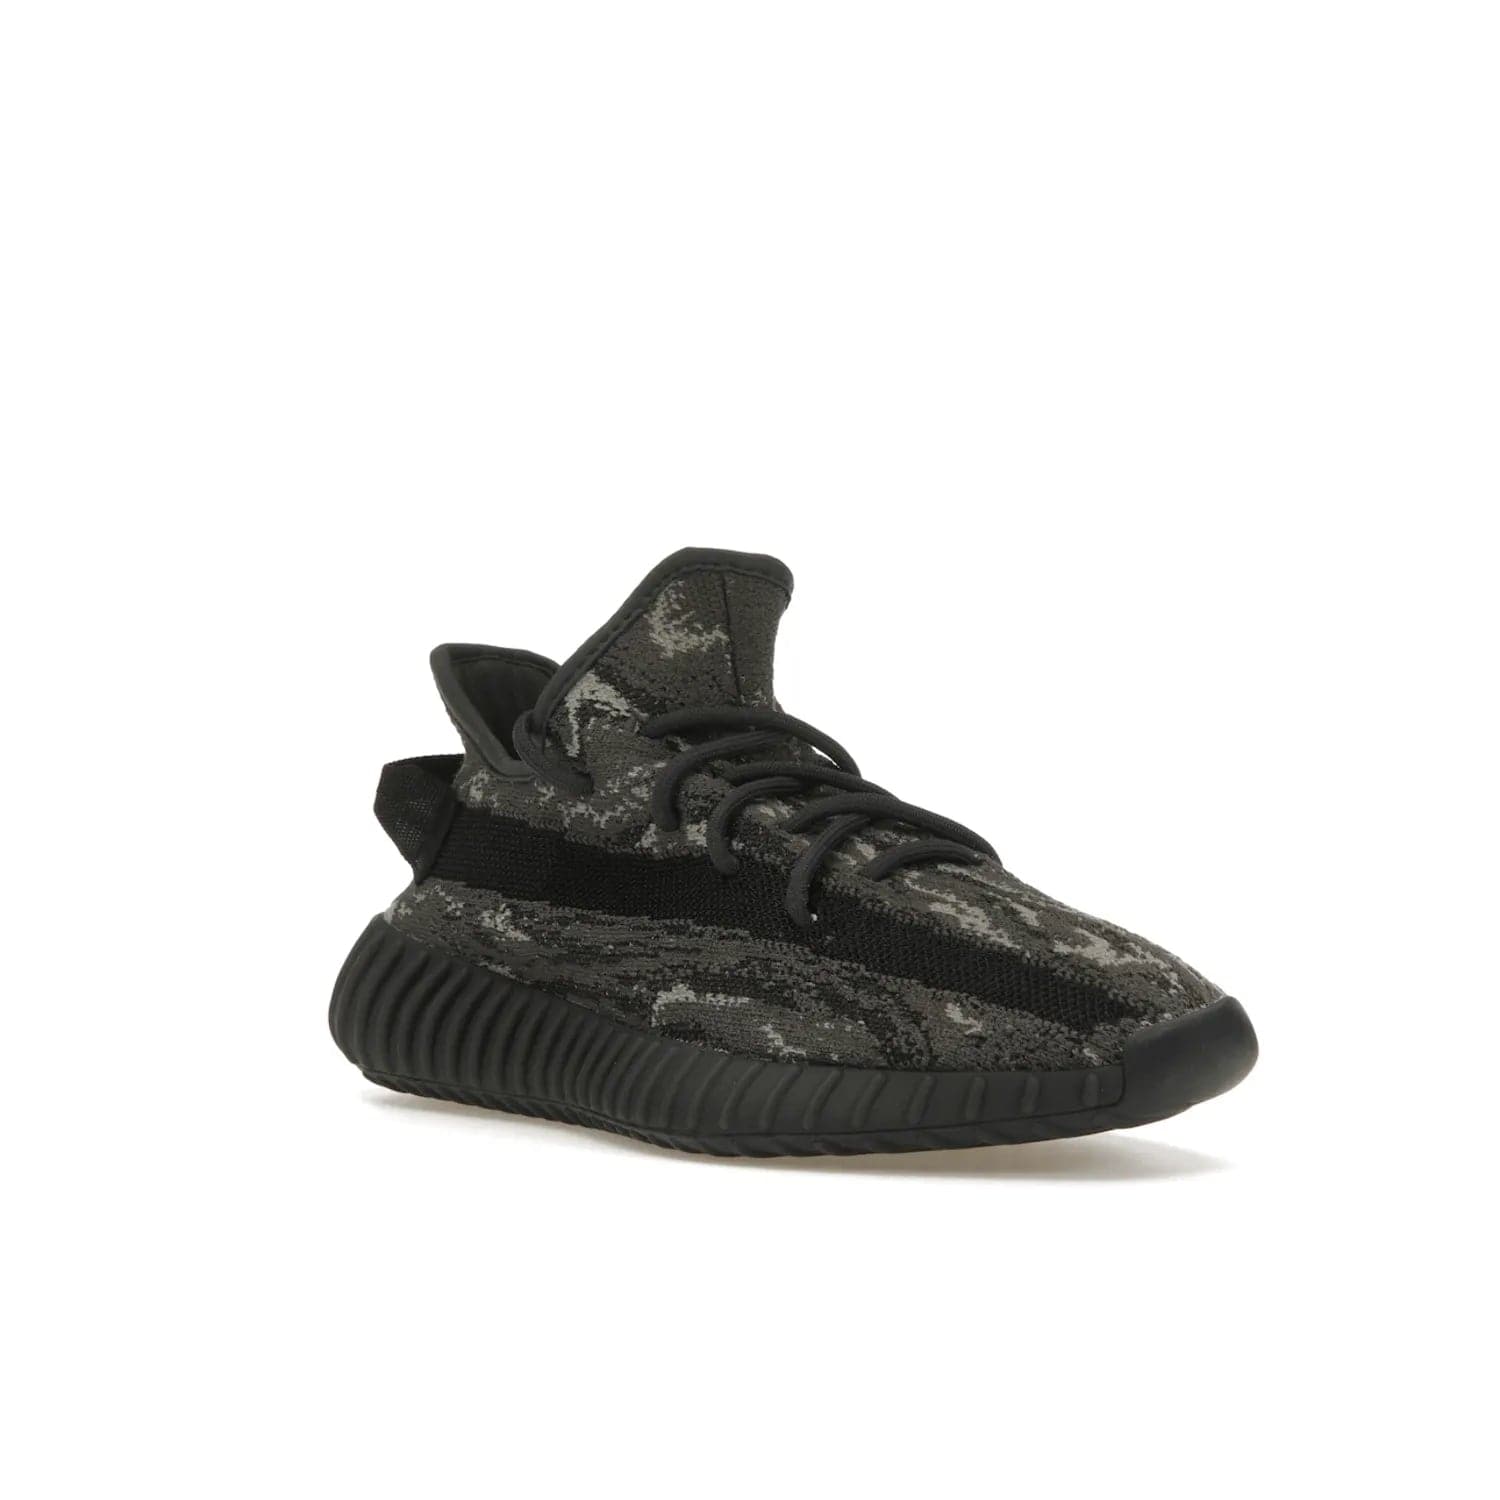 adidas Yeezy Boost 350 V2 MX Dark Salt - Image 6 - Only at www.BallersClubKickz.com - ##
The adidas Yeezy Boost 350 V2 MX Dark Salt offers a contemporary look with a signature combination of grey and black hues. Cushioned Boost midsole and side stripe allow for all day wear. Get the perfect fashion-forward addition with this sleek sneaker for $230.